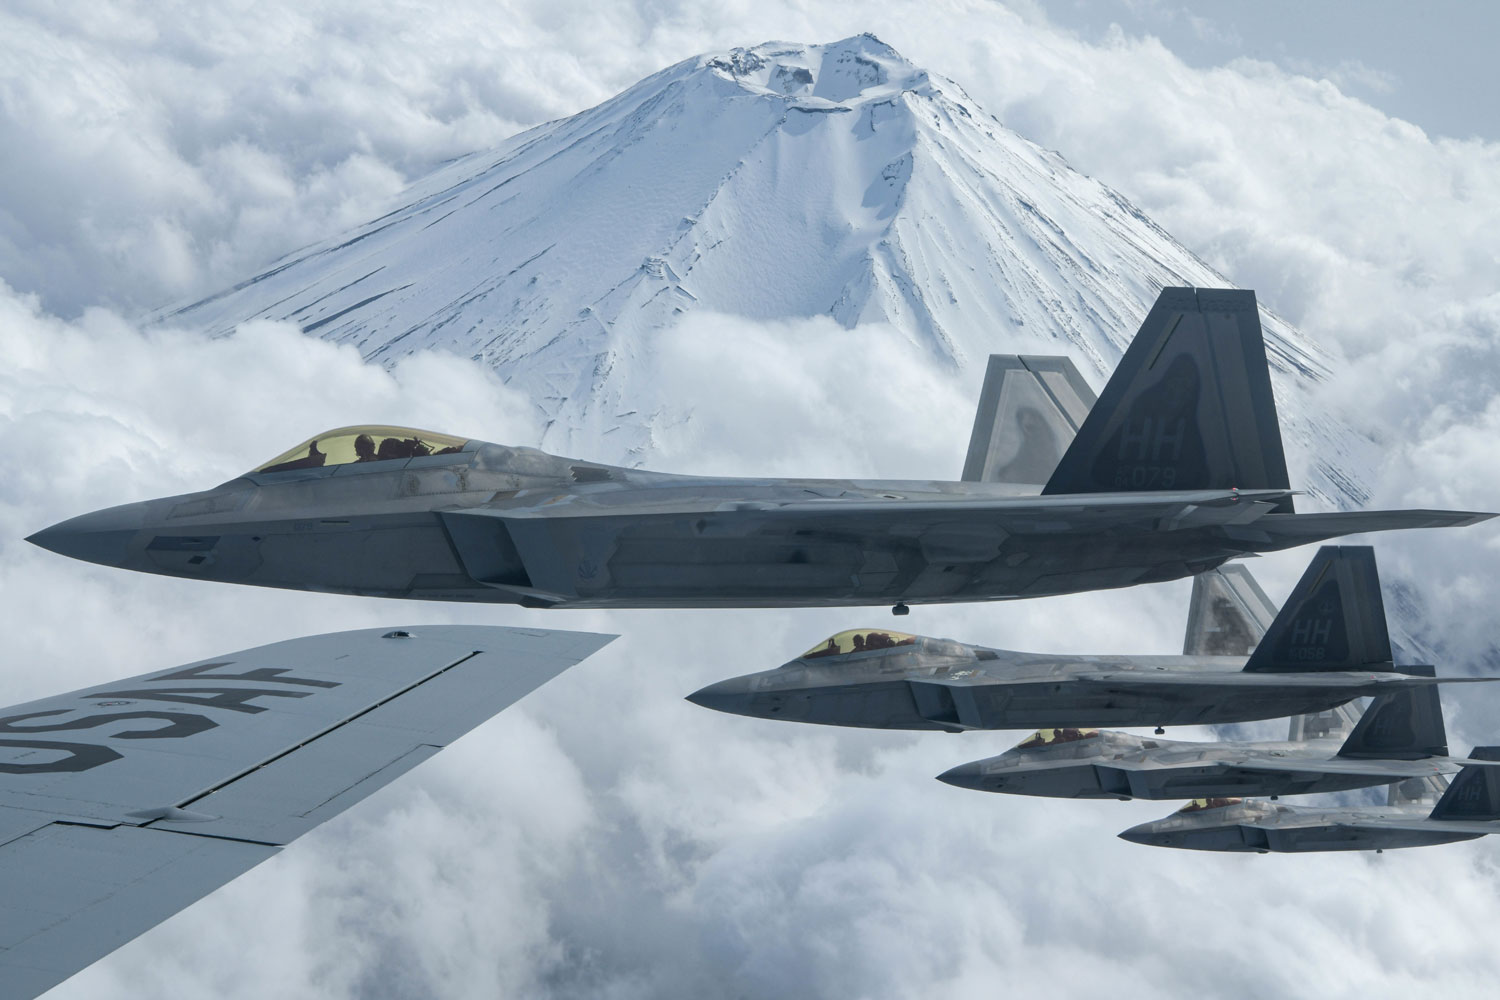 USAF withdraws F-22 Raptor from future plans - Air Data News